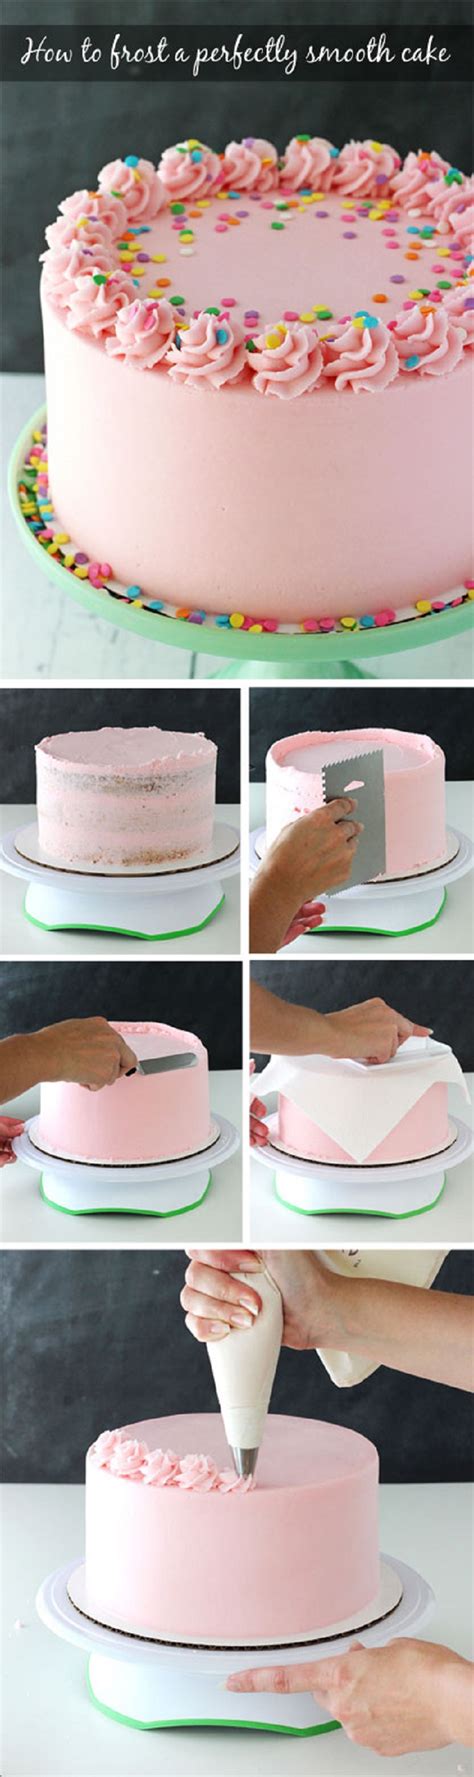 With some basic cake art supplies, you'll be able to. 17 Amazing Cake Decorating Ideas, Tips and Tricks That'll Make You A Pro